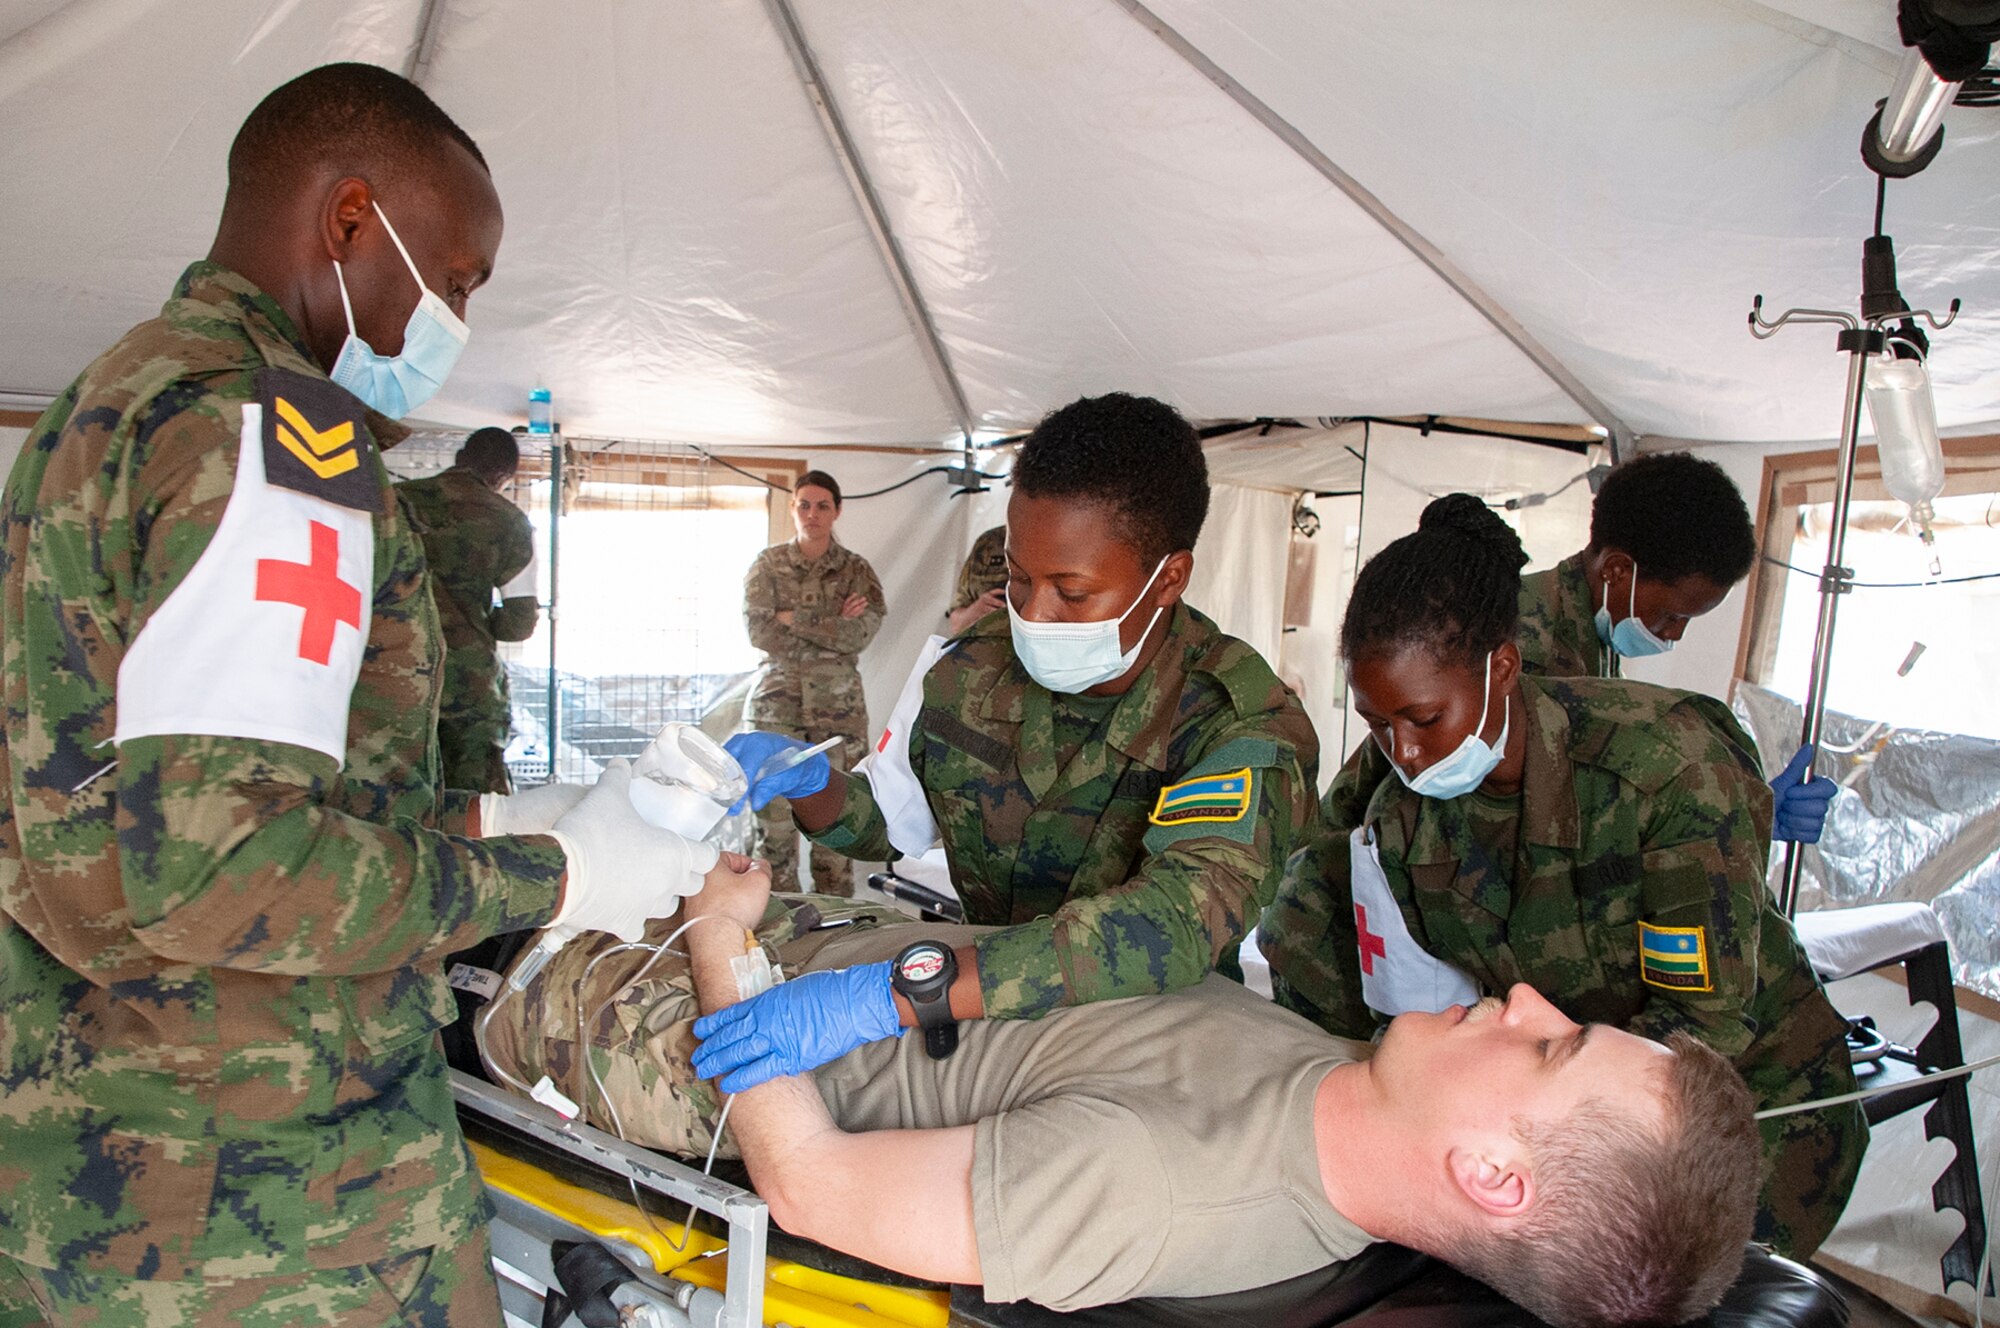 Medics from the Rwanda Defense Force's Medical Corps treat a simulated patient - a volunteer from the Nebraska Army National Guard - in a United Nations Level Two hospital during a medical/engineering exercise at Gako, Rwanda, in March 2022. The exercise enabled members of the Rwanda Defense Force and the Nebraska National Guard to work together through the Department of Defense National Guard Bureau State Partnership Program.